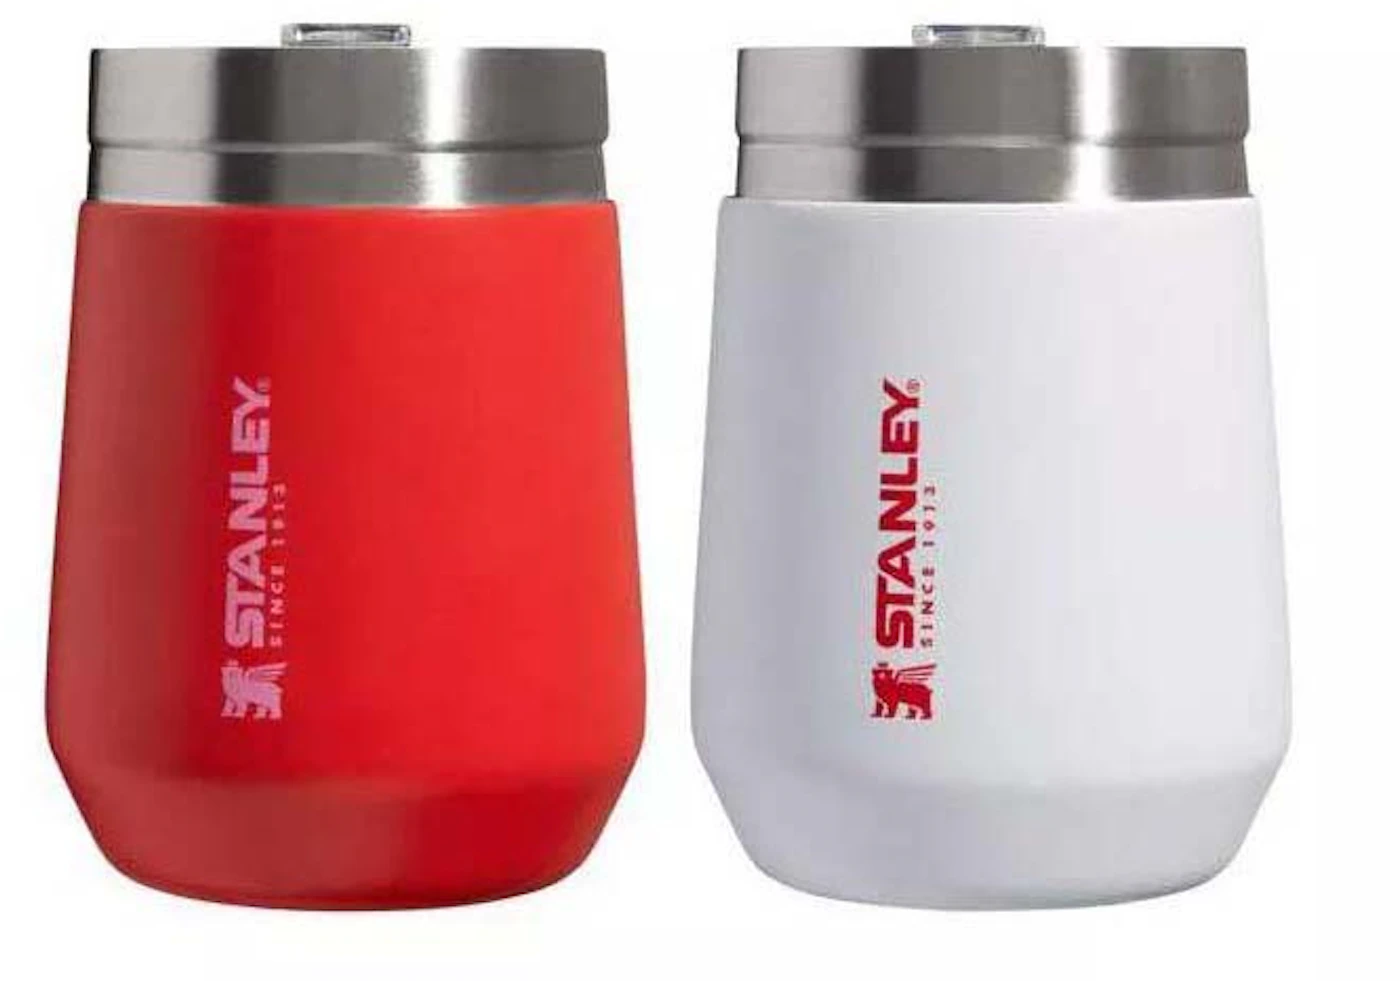 Stanley The Everyday GO 10oz Tumbler - 2 Pack - Hike & Camp